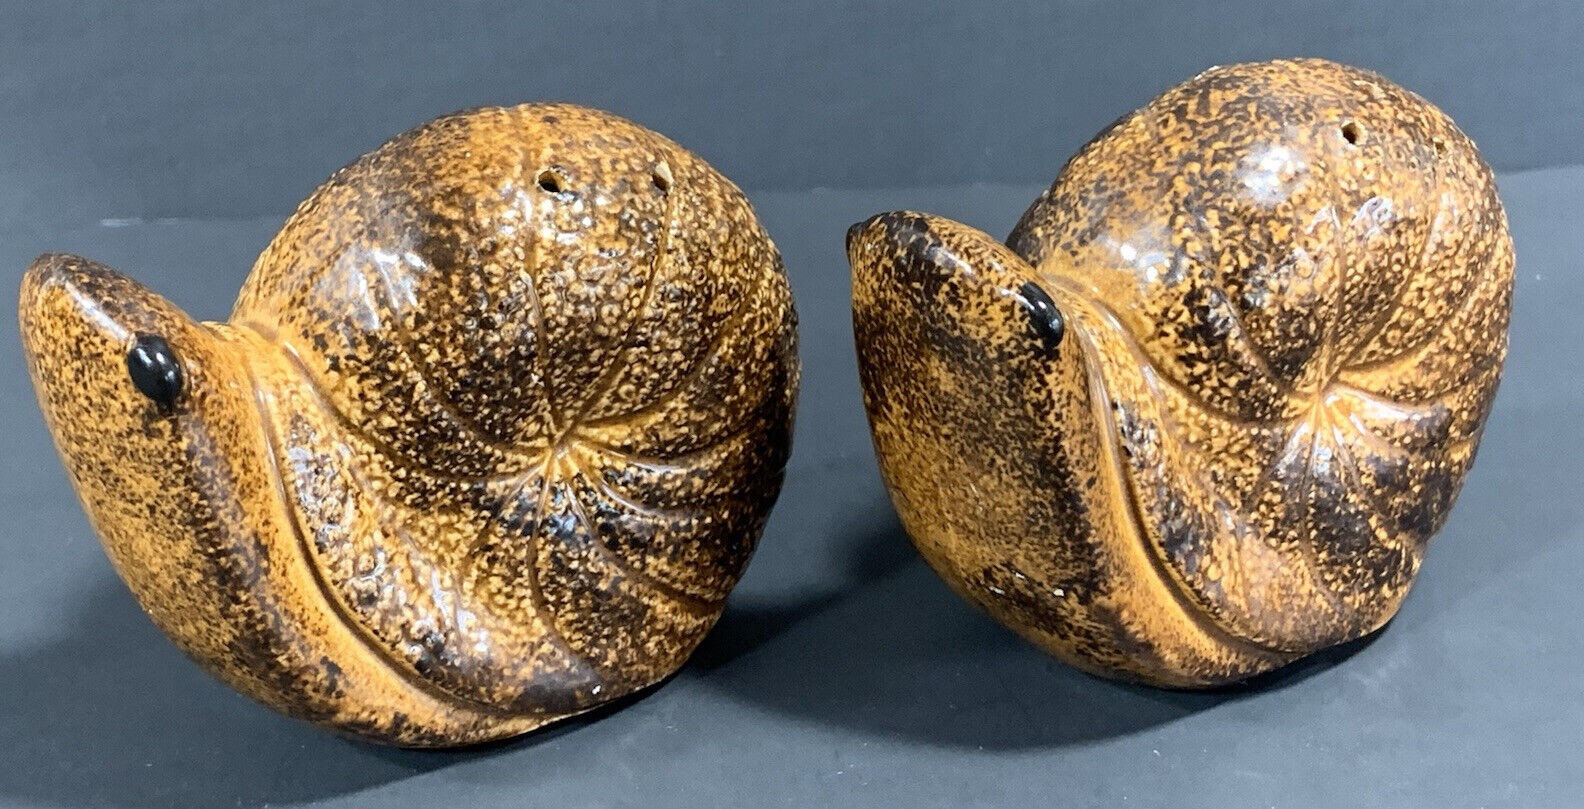 Vintage 1960's Made in Japan Ceramic Snail Salt and Pepper Shakers